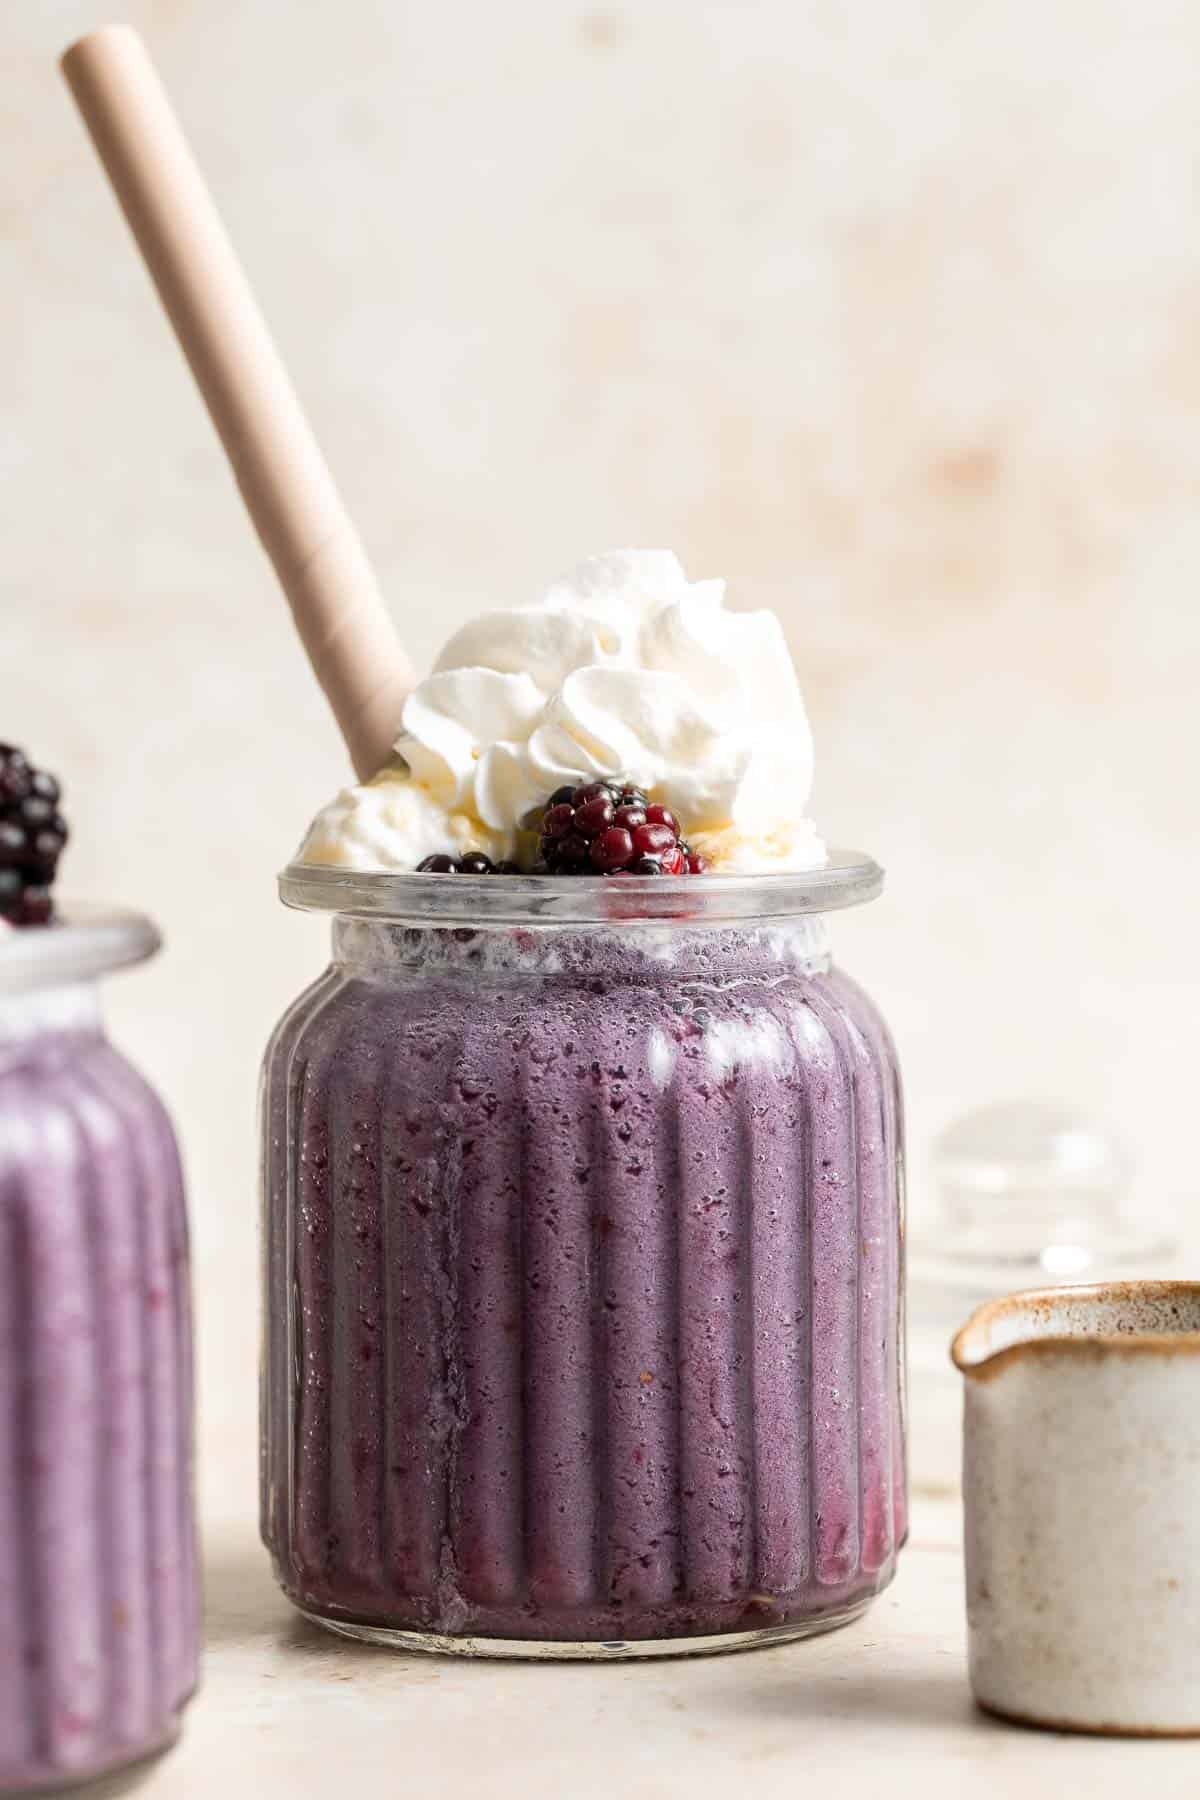 This blackberry milkshake is thick, creamy, and smooth. You won’t believe how quick and easy it is to make at home with 3 ingredients in under 5 minutes. | aheadofthyme.com